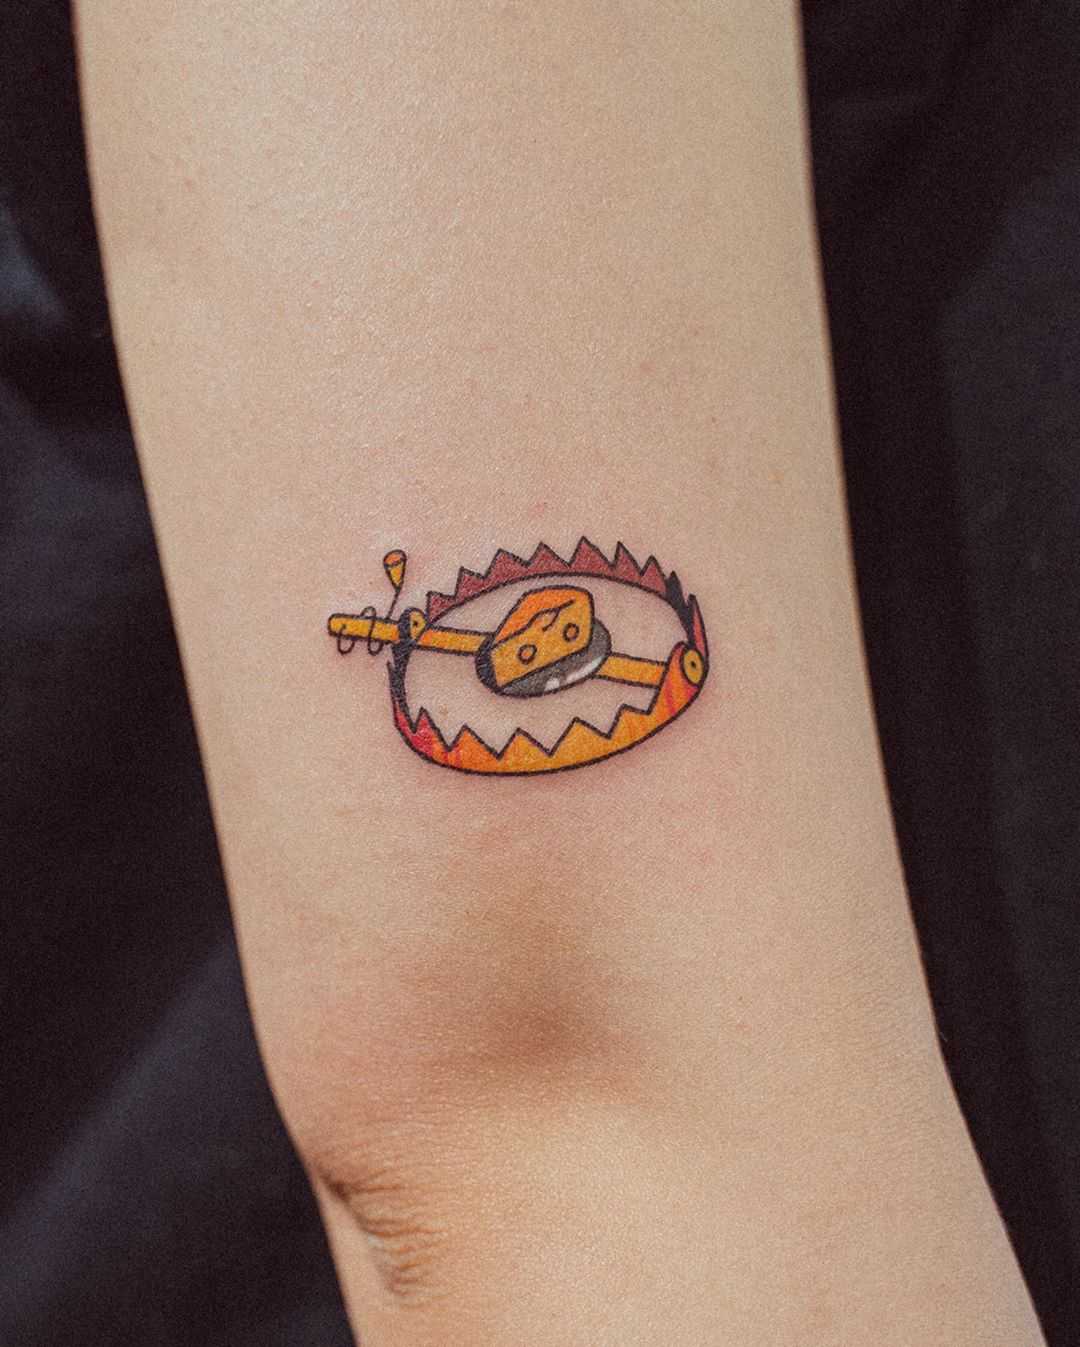 Cheese in the trap by tattooist Bongkee